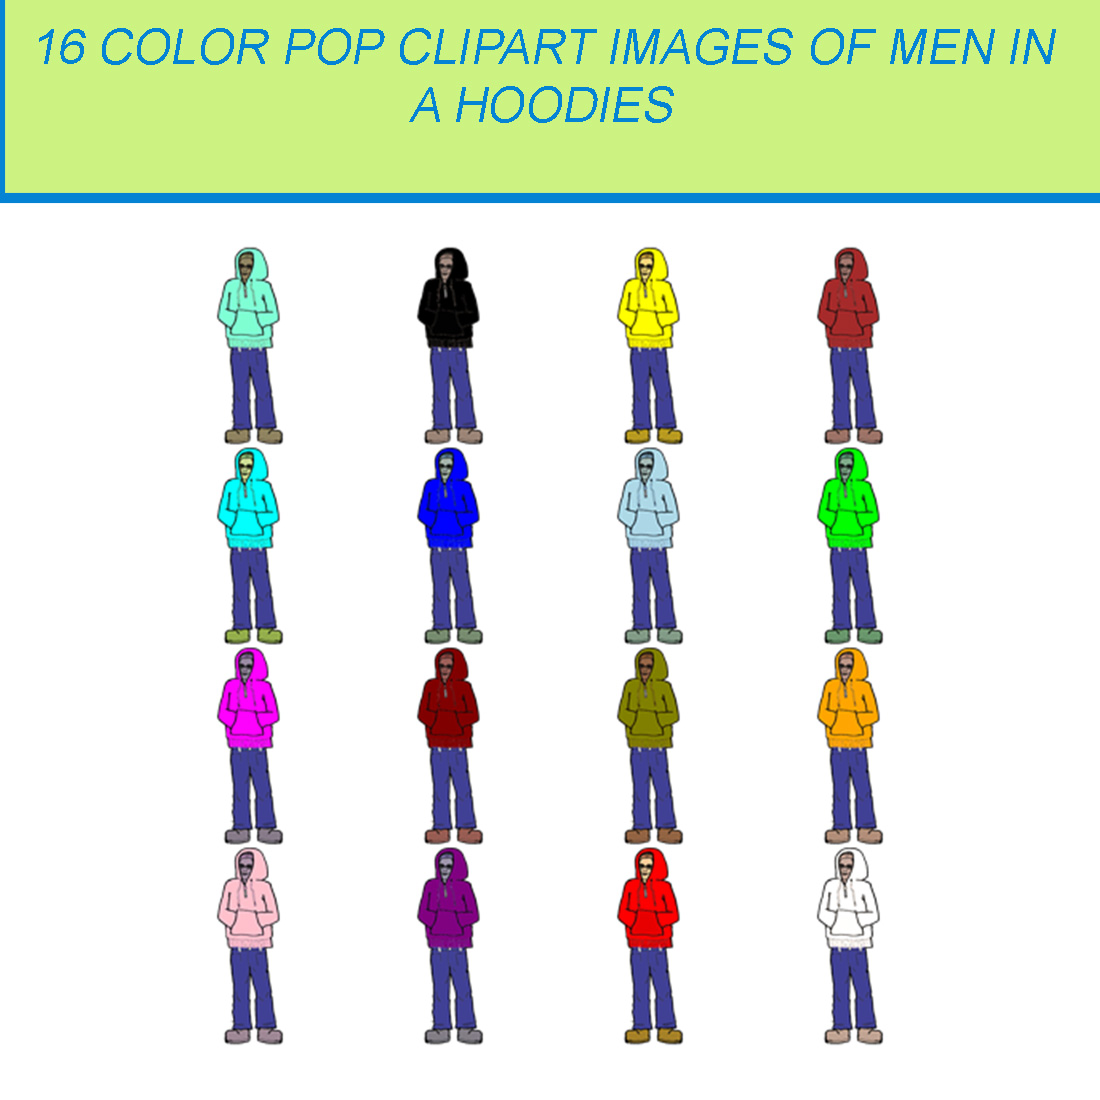 16 COLOR POP CLIPART IMAGES OF MAN IN A HOODIE cover image.